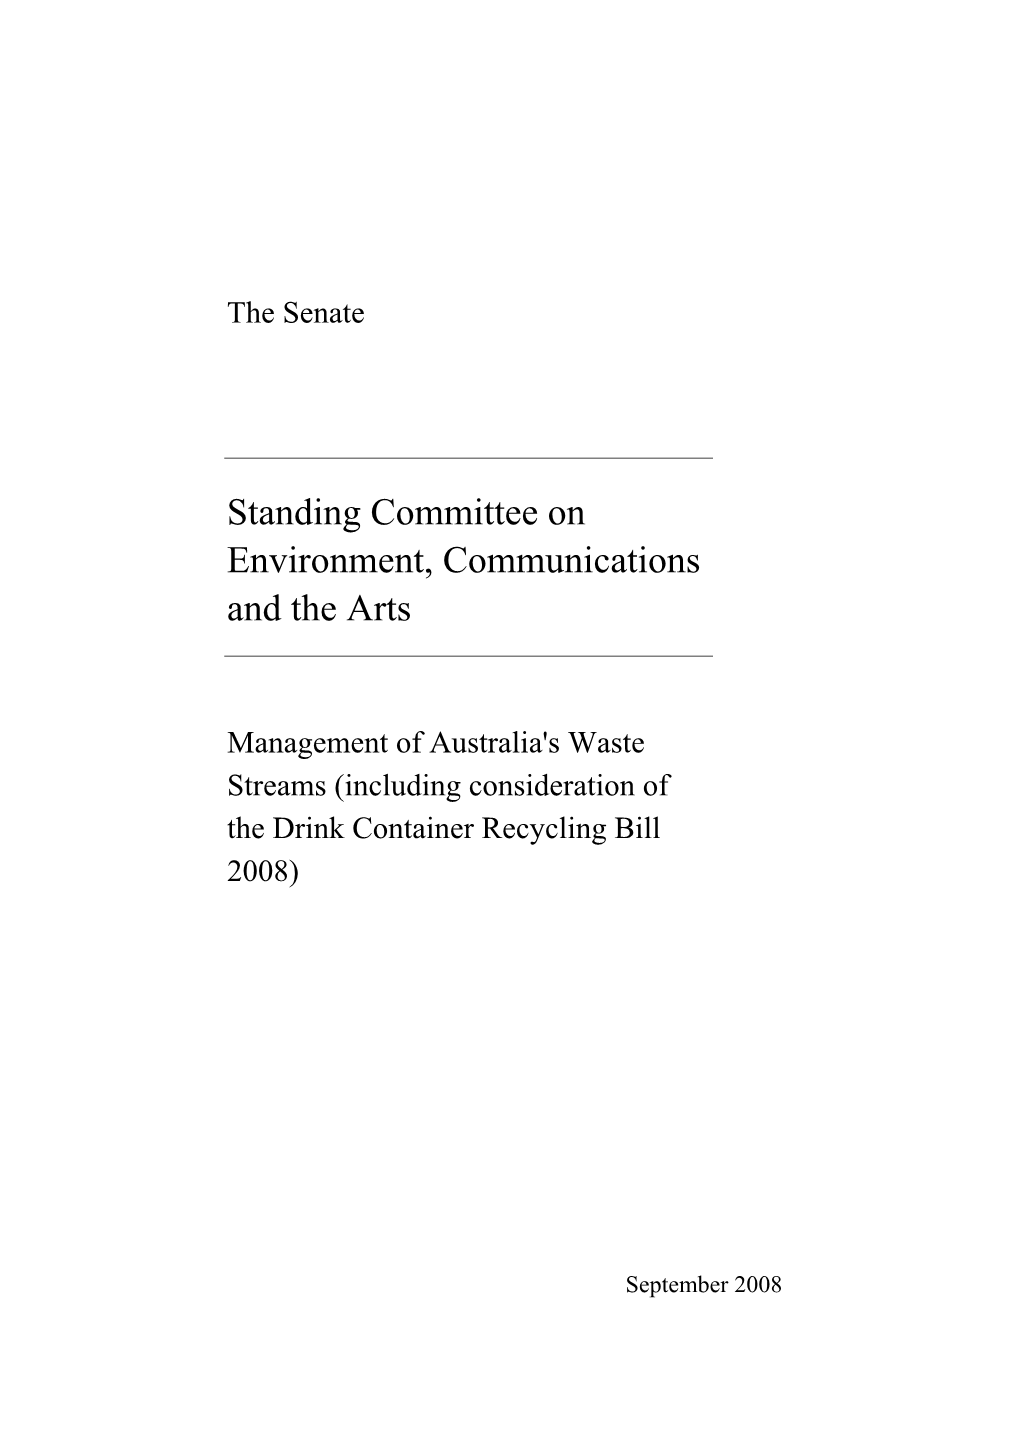 Report: Inquiry Into the Management of Australia's Waste Streams